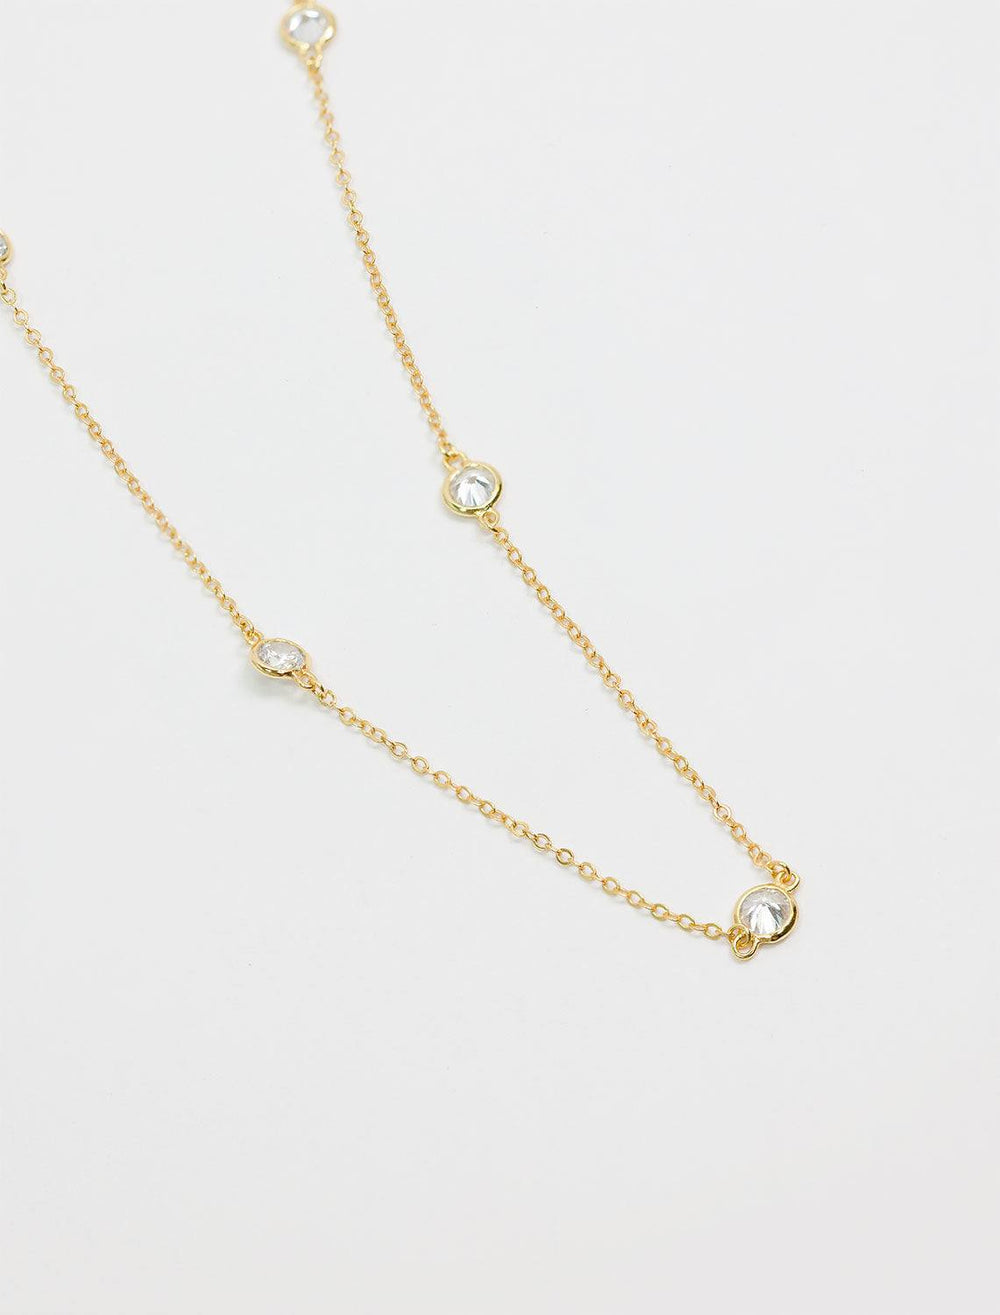 Shashi emily necklace in yellow gold - Twigs